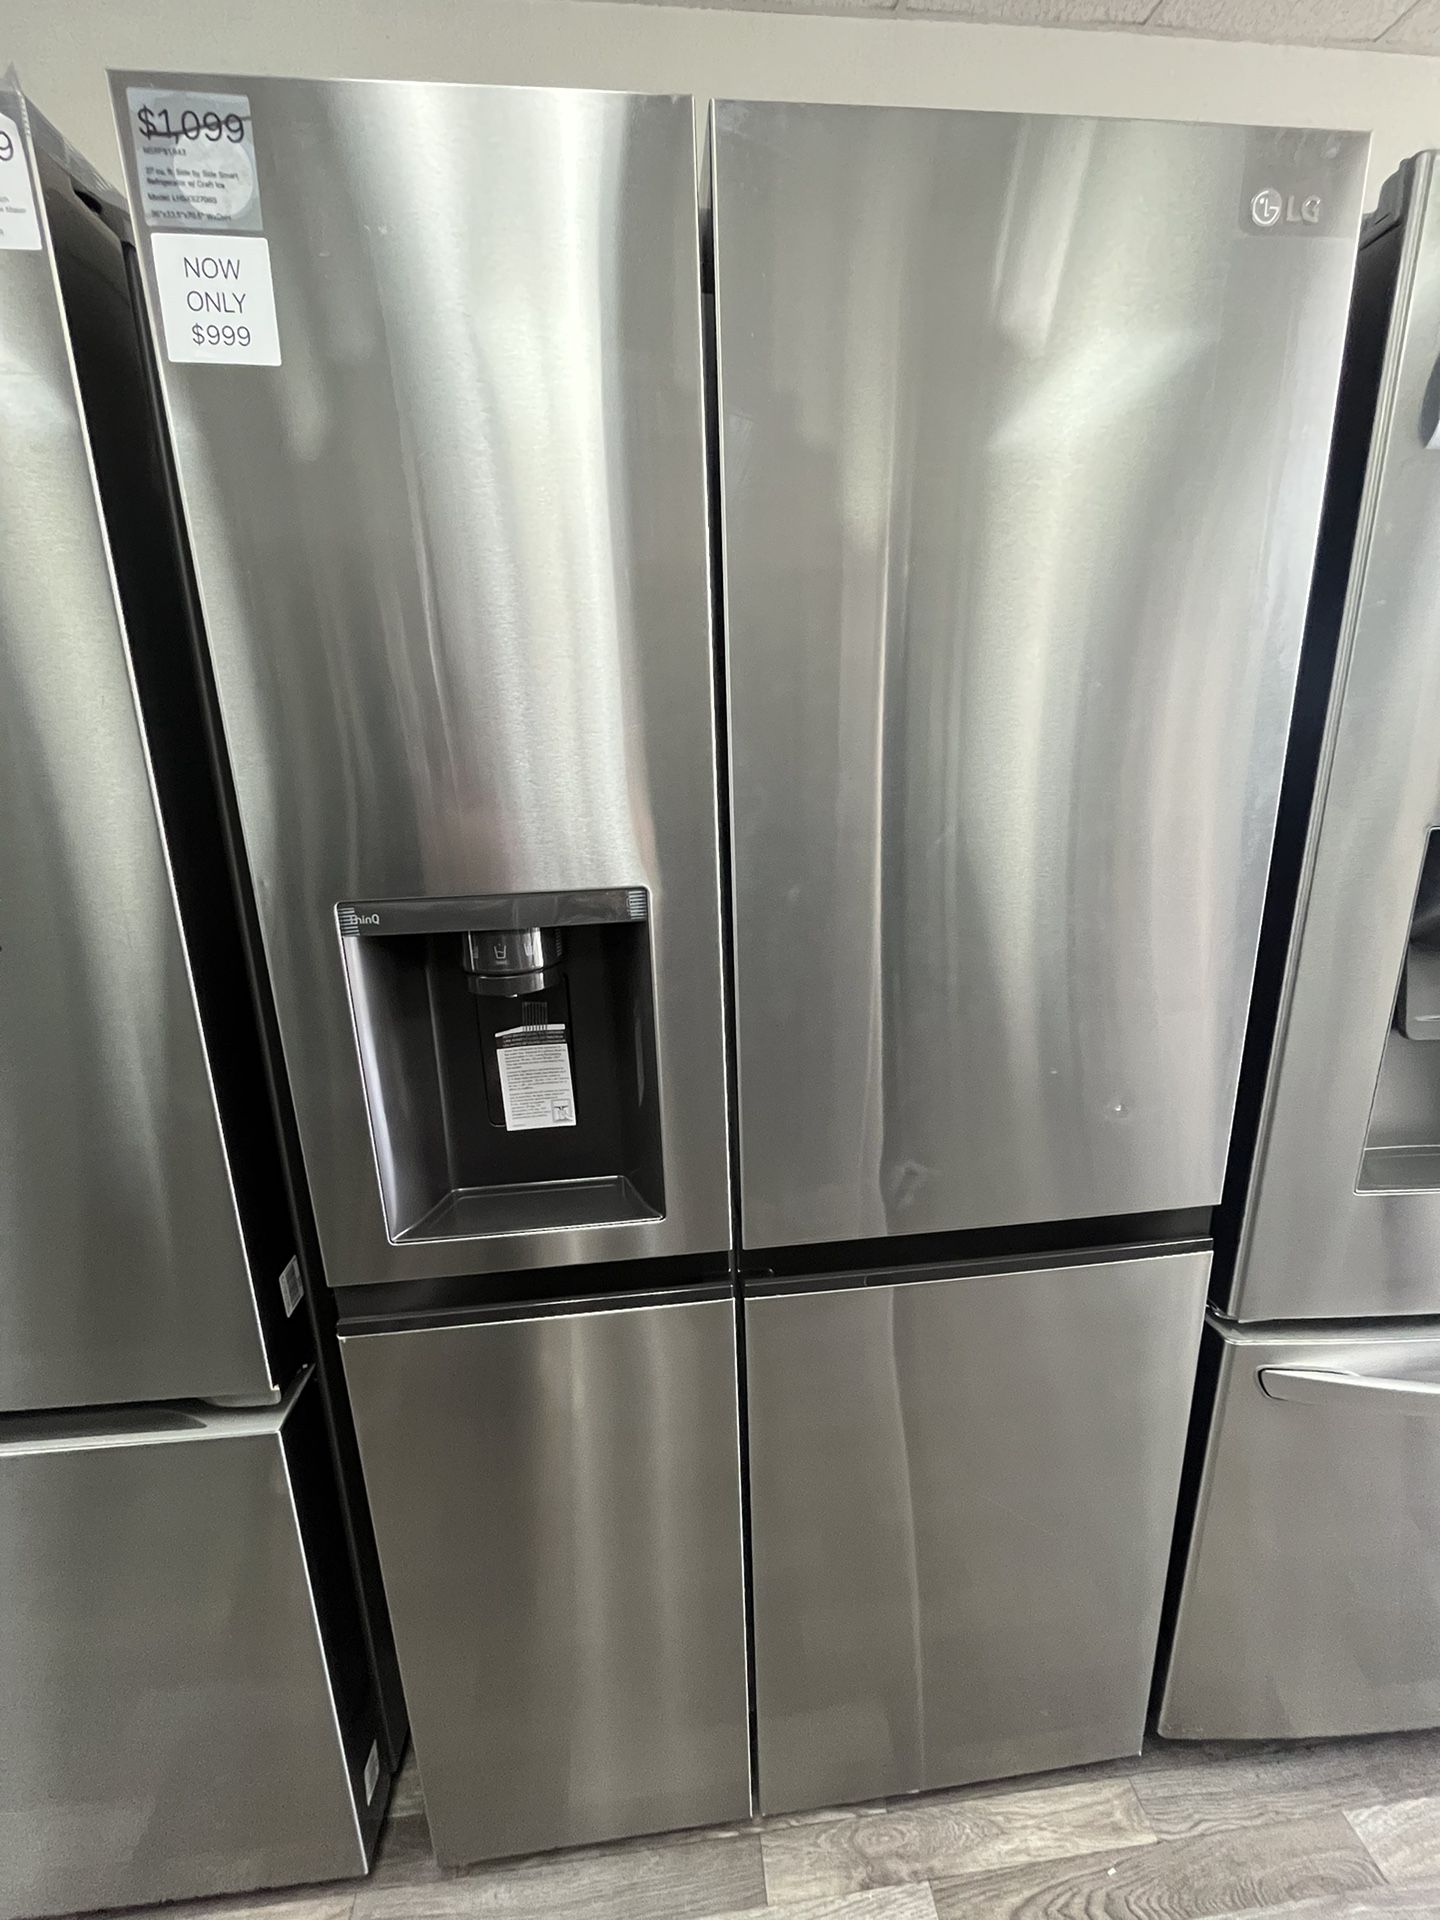 WHAAAT??? Only $999!?!? LG Side by Side 27 Cu Ft Refrigerator W/ Craft Ice